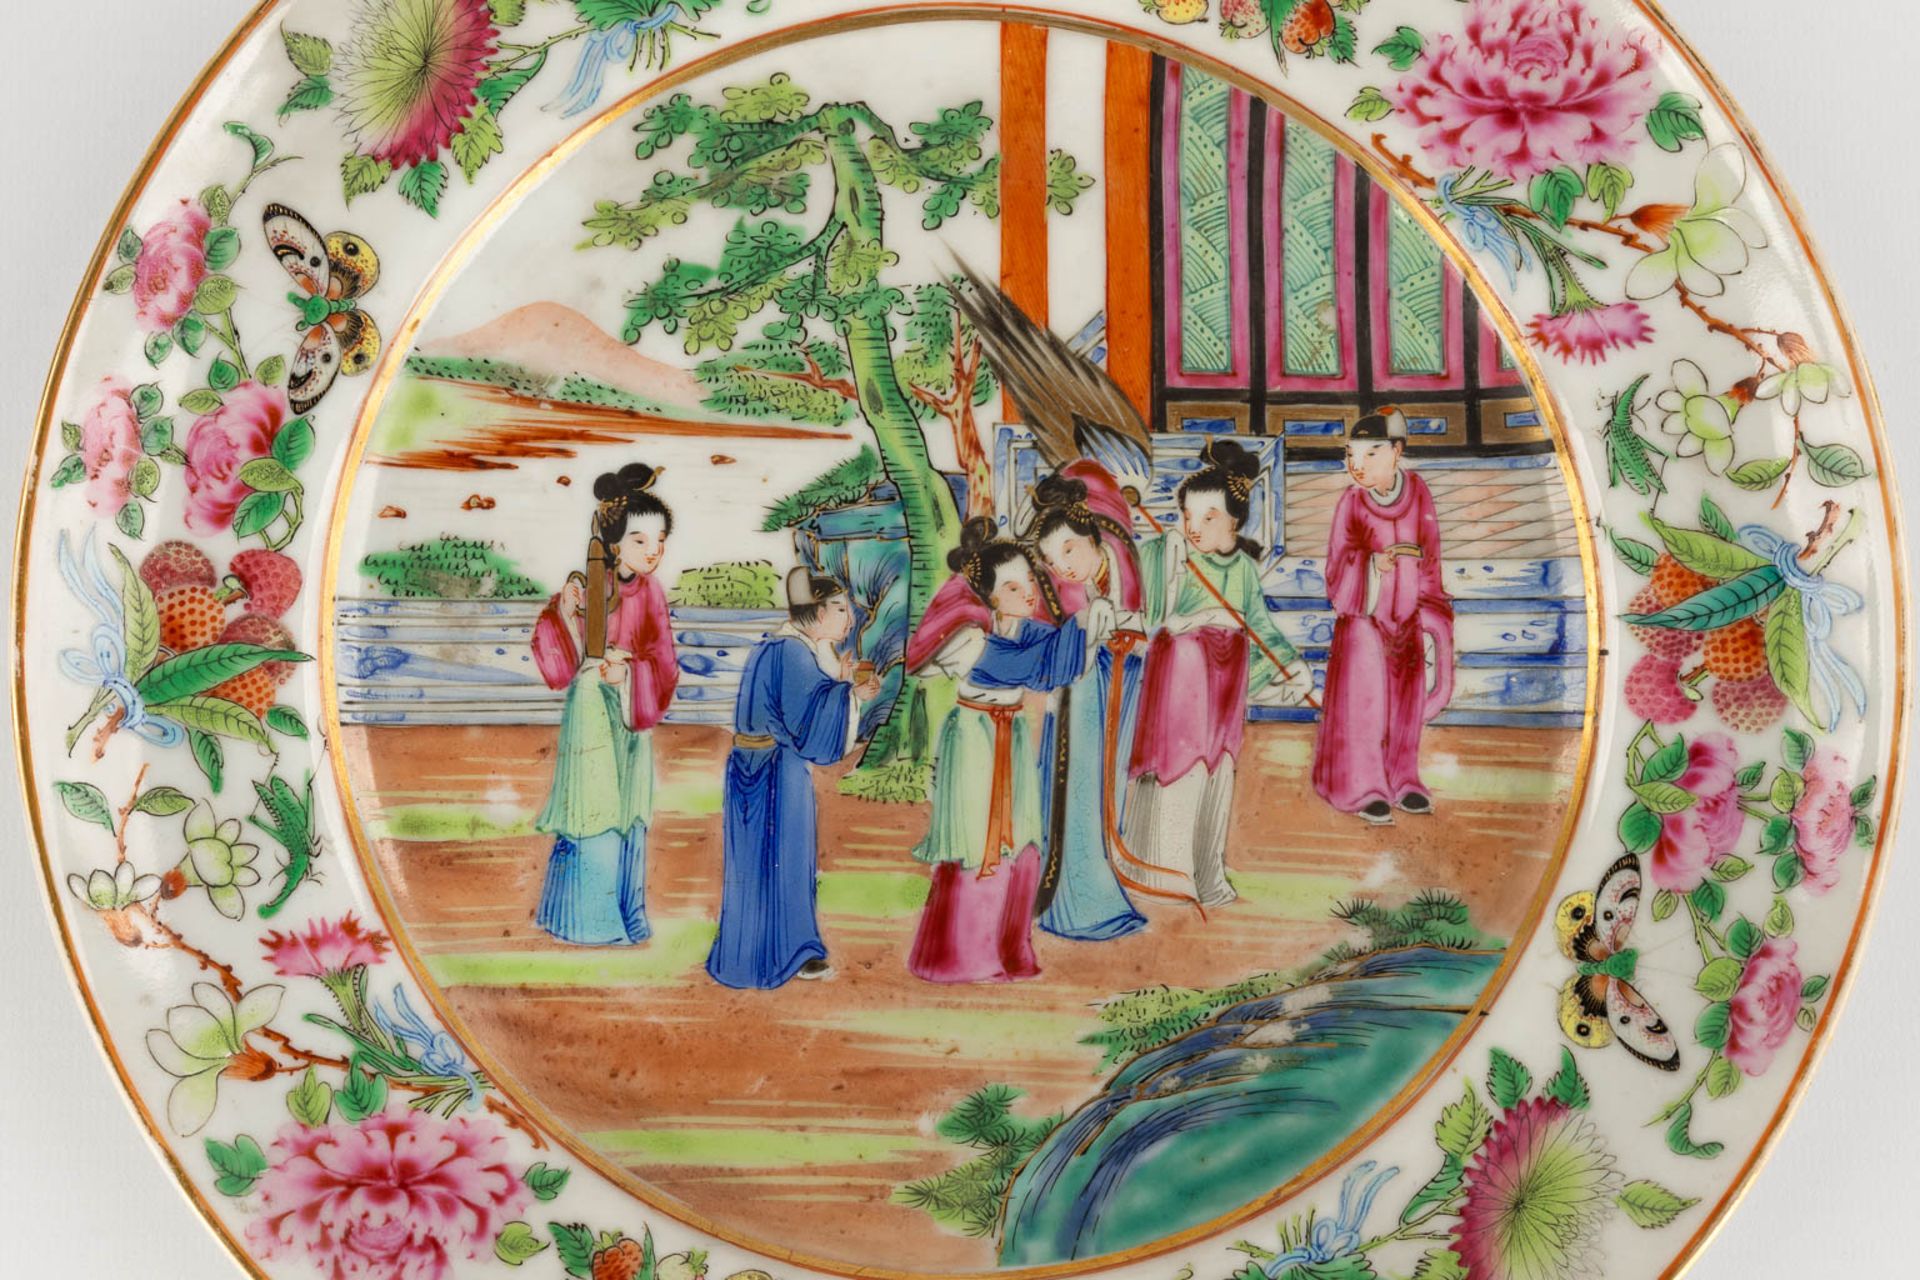 A Chinese Vase and 4 Canton plates, decorated with figurines. 19th/20th C. (H:42 x D:20 cm) - Image 18 of 23